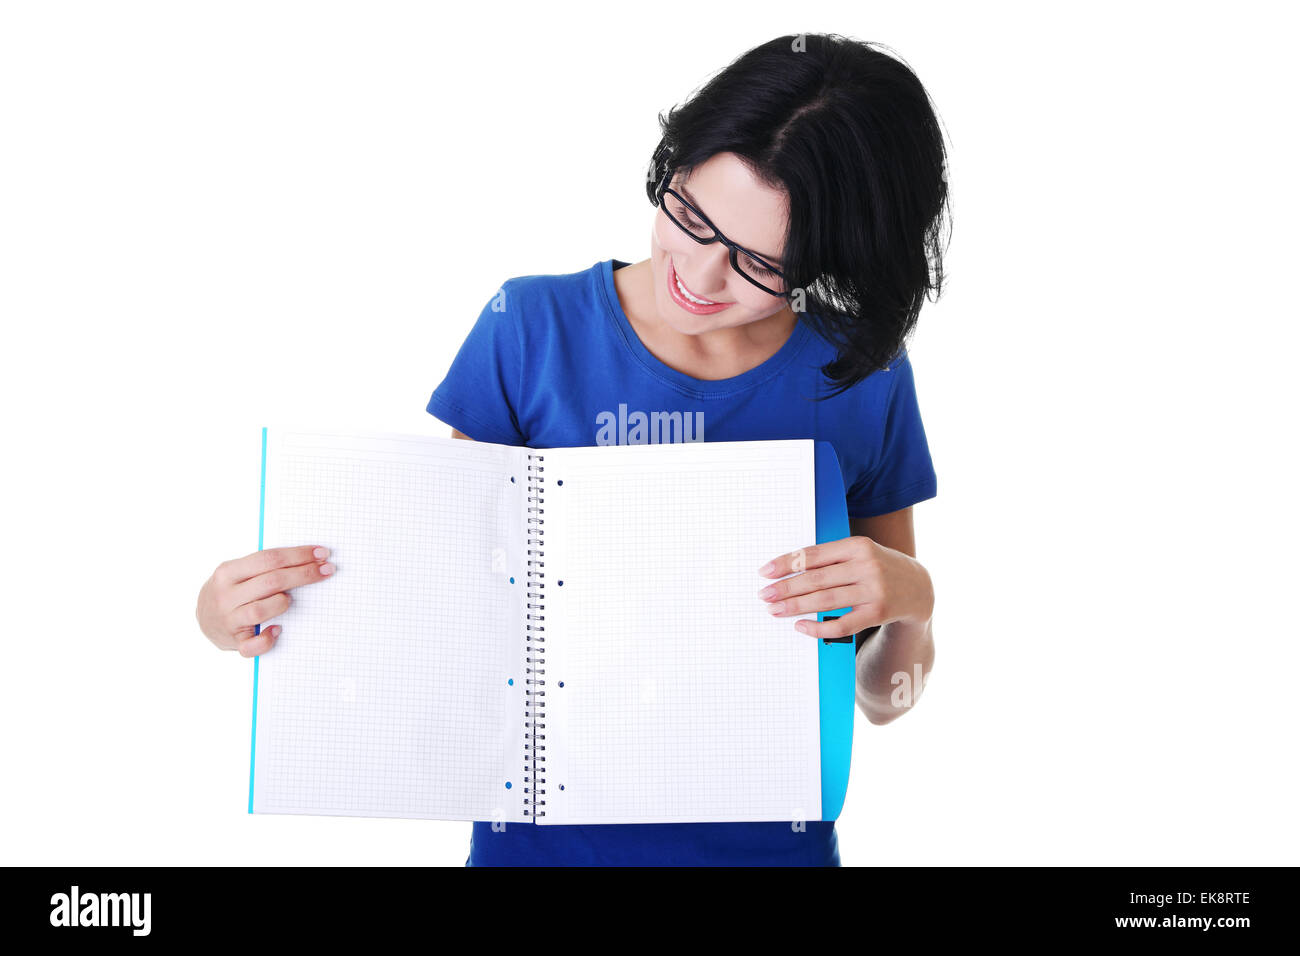 Young woman showing blank pages of her notebook Stock Photo